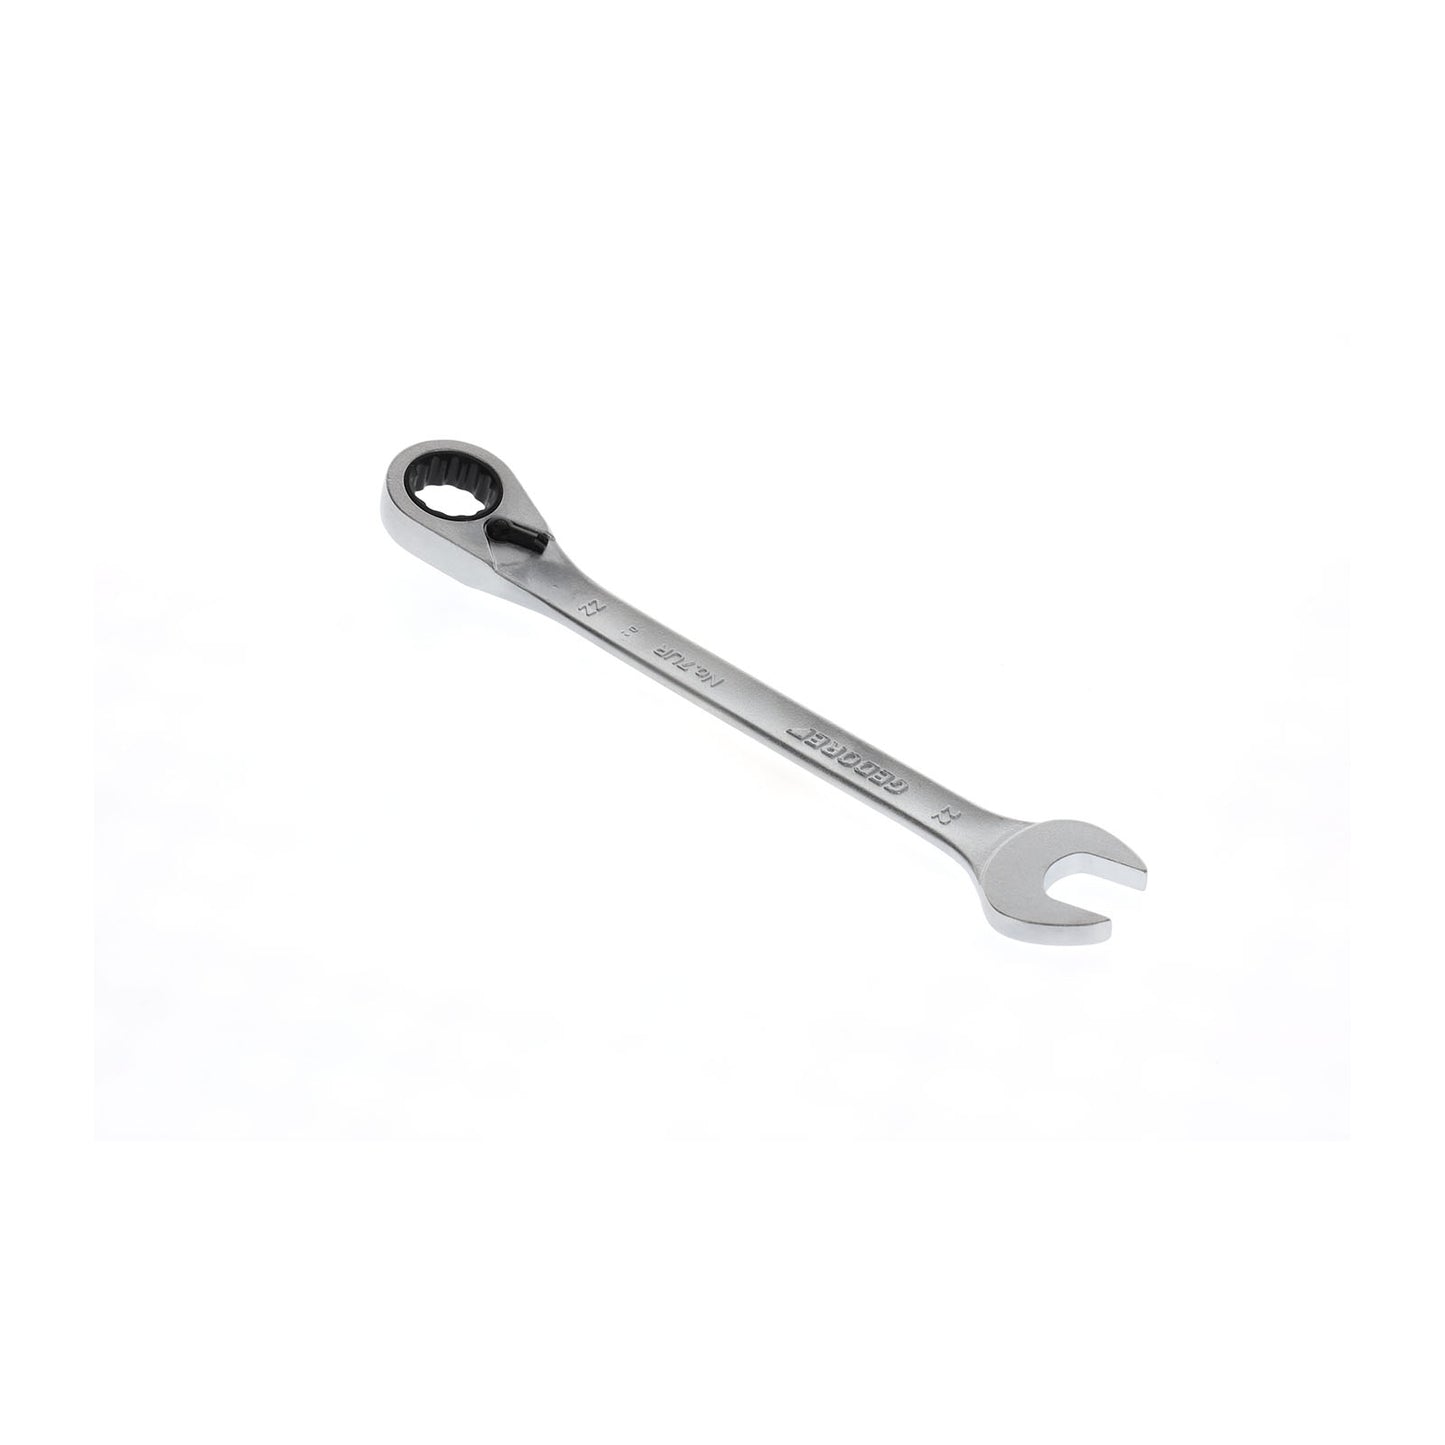 GEDORE 7 UR 22 - Ratchet combination wrench, 22mm (2297388)